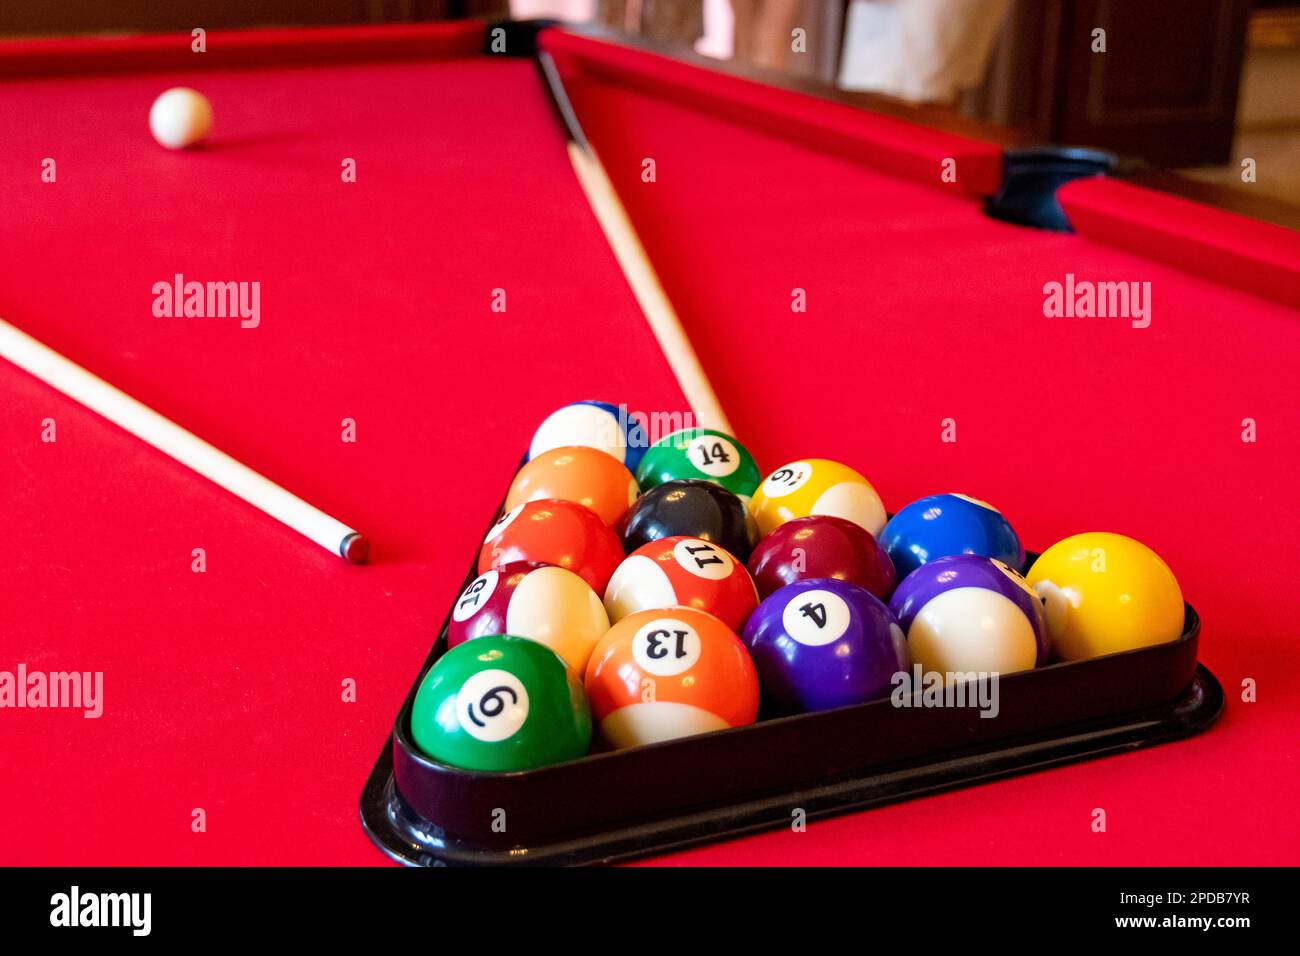 Red billiard table with billiard balls and cues Stock Photo